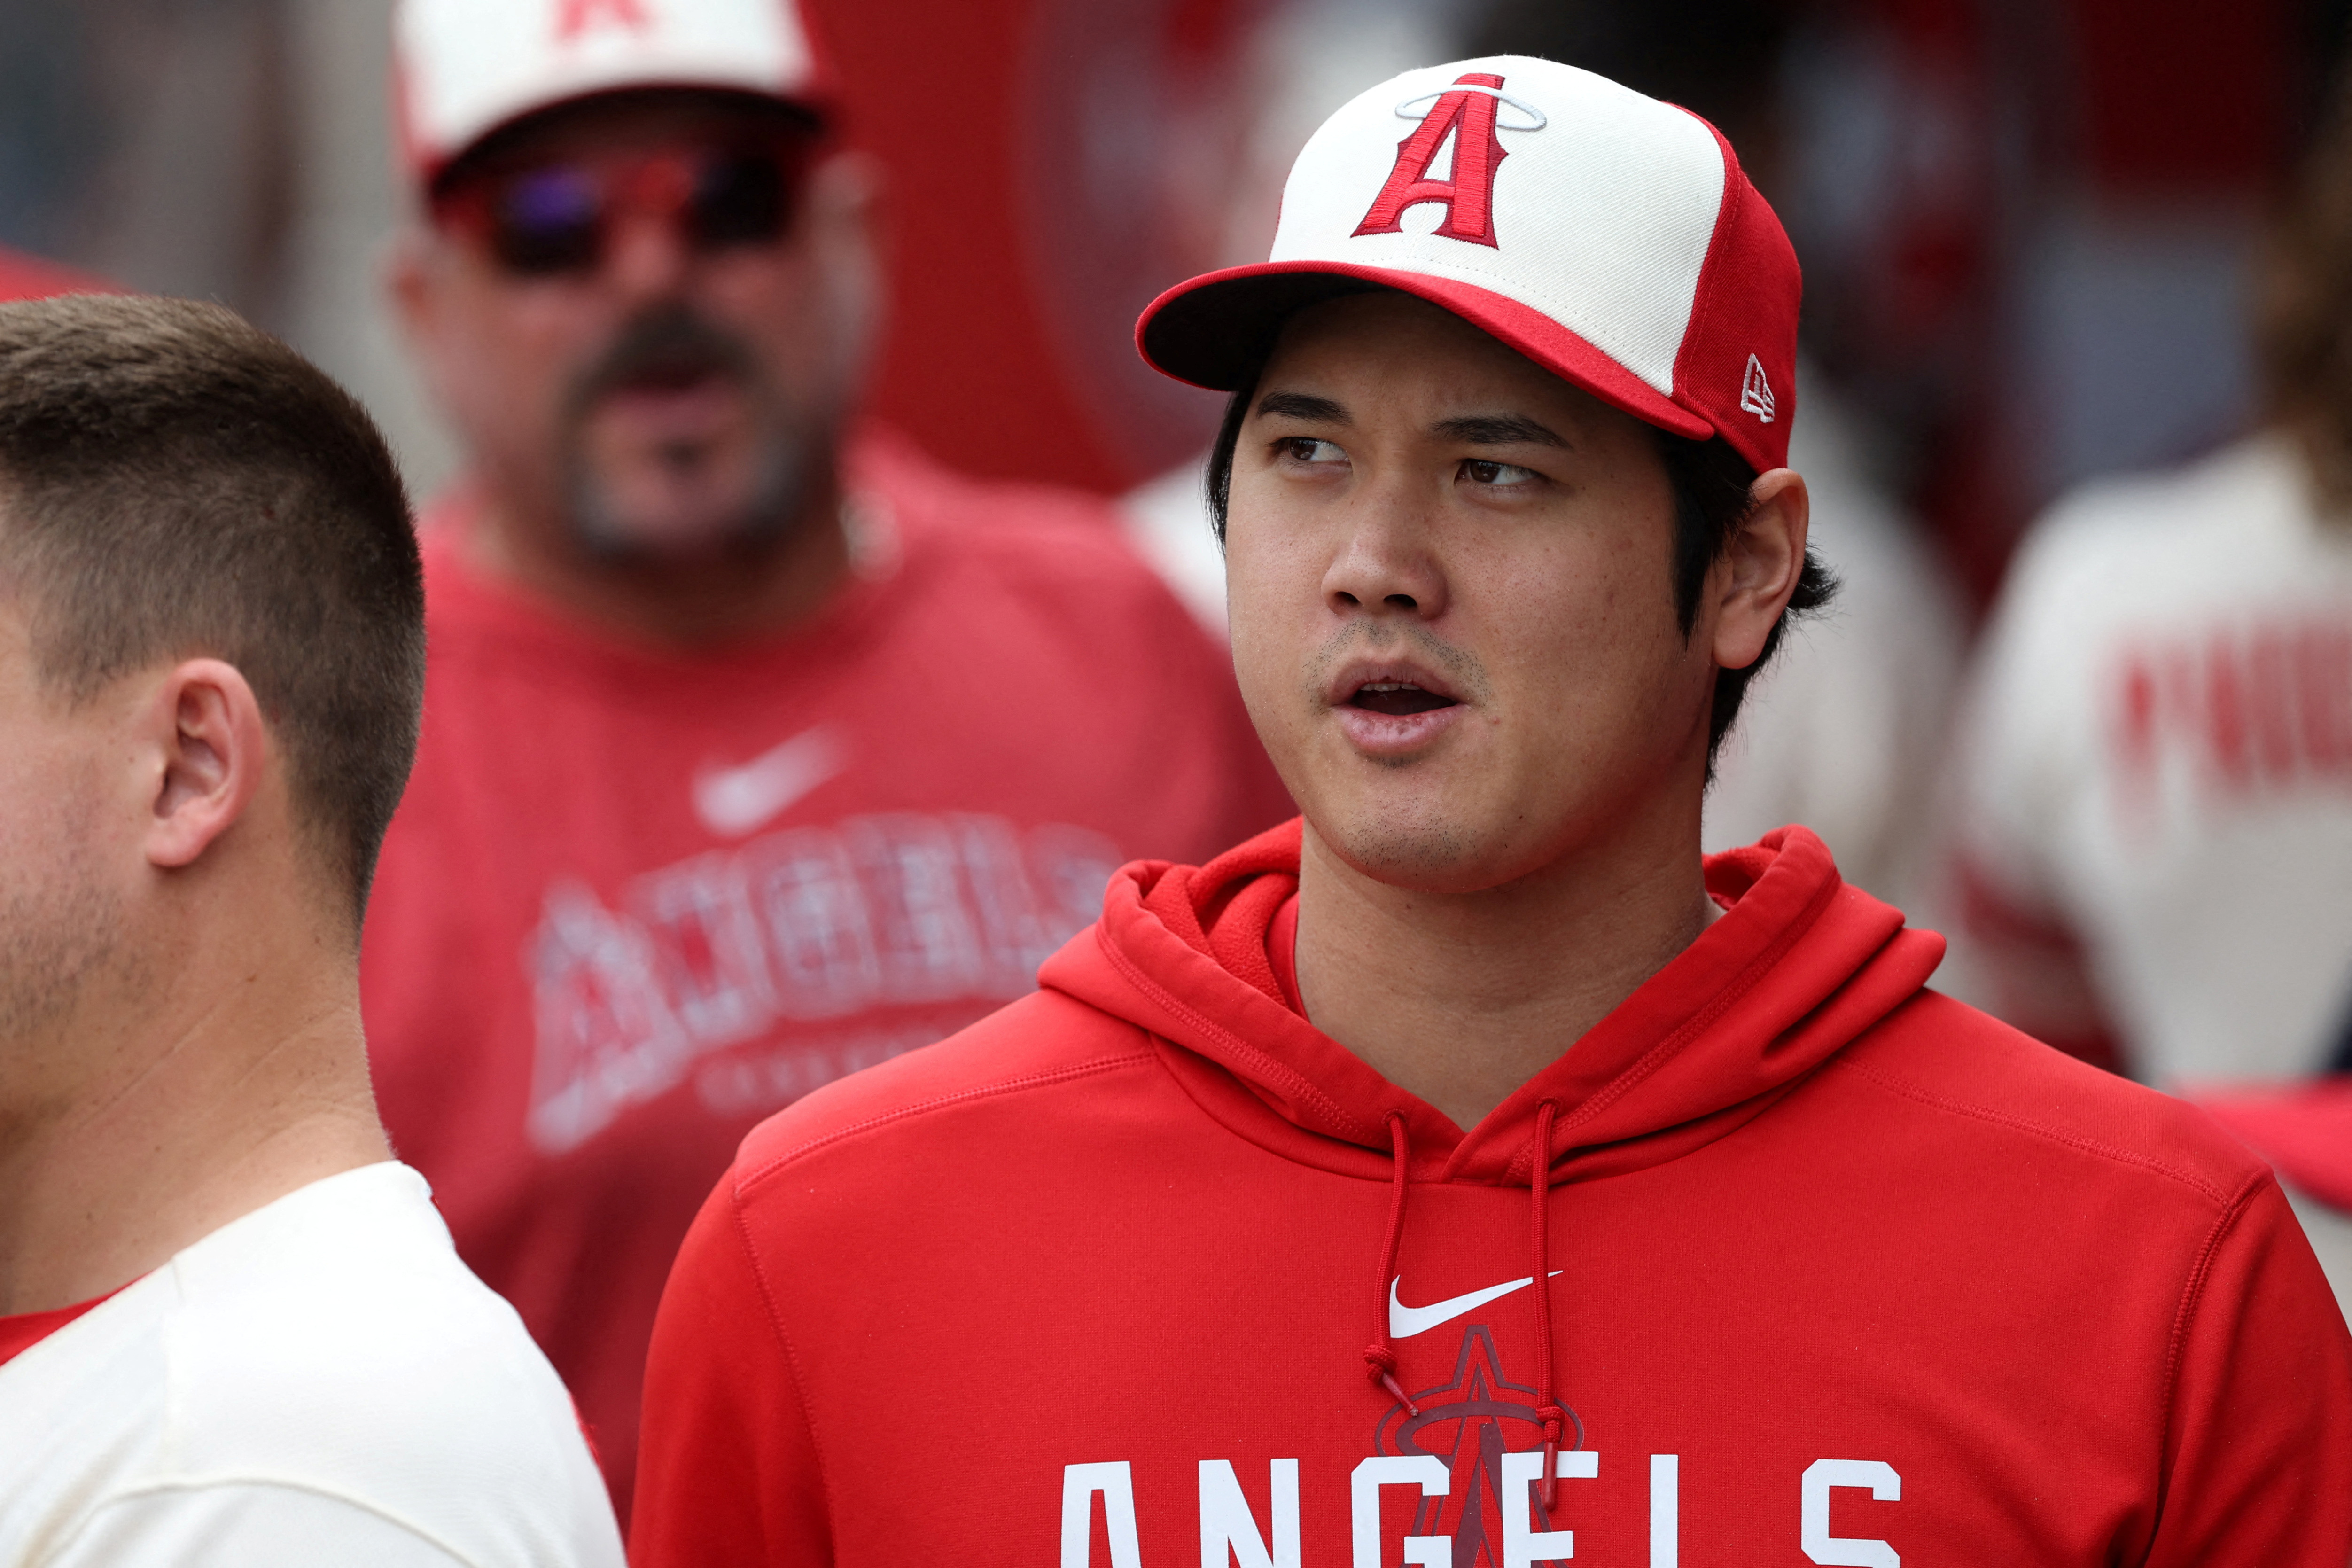 Angels star Shohei Ohtani won't pitch for the rest of the season after  elbow injury